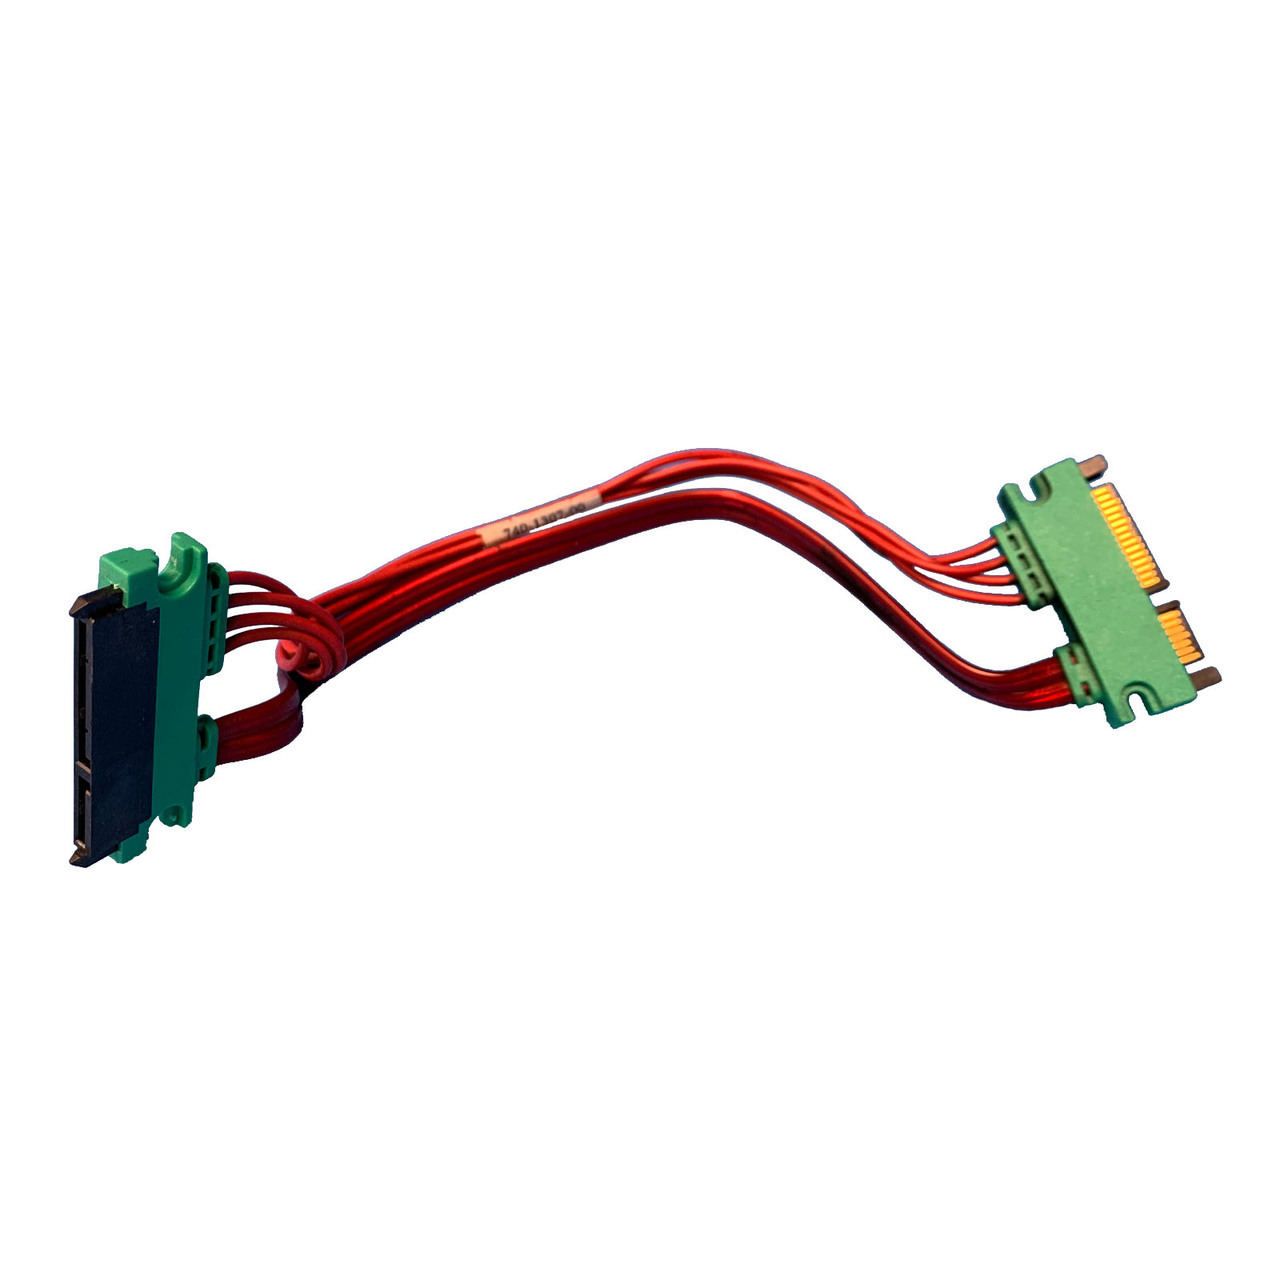 703-1134-02 | EMC Control Panel with Cable